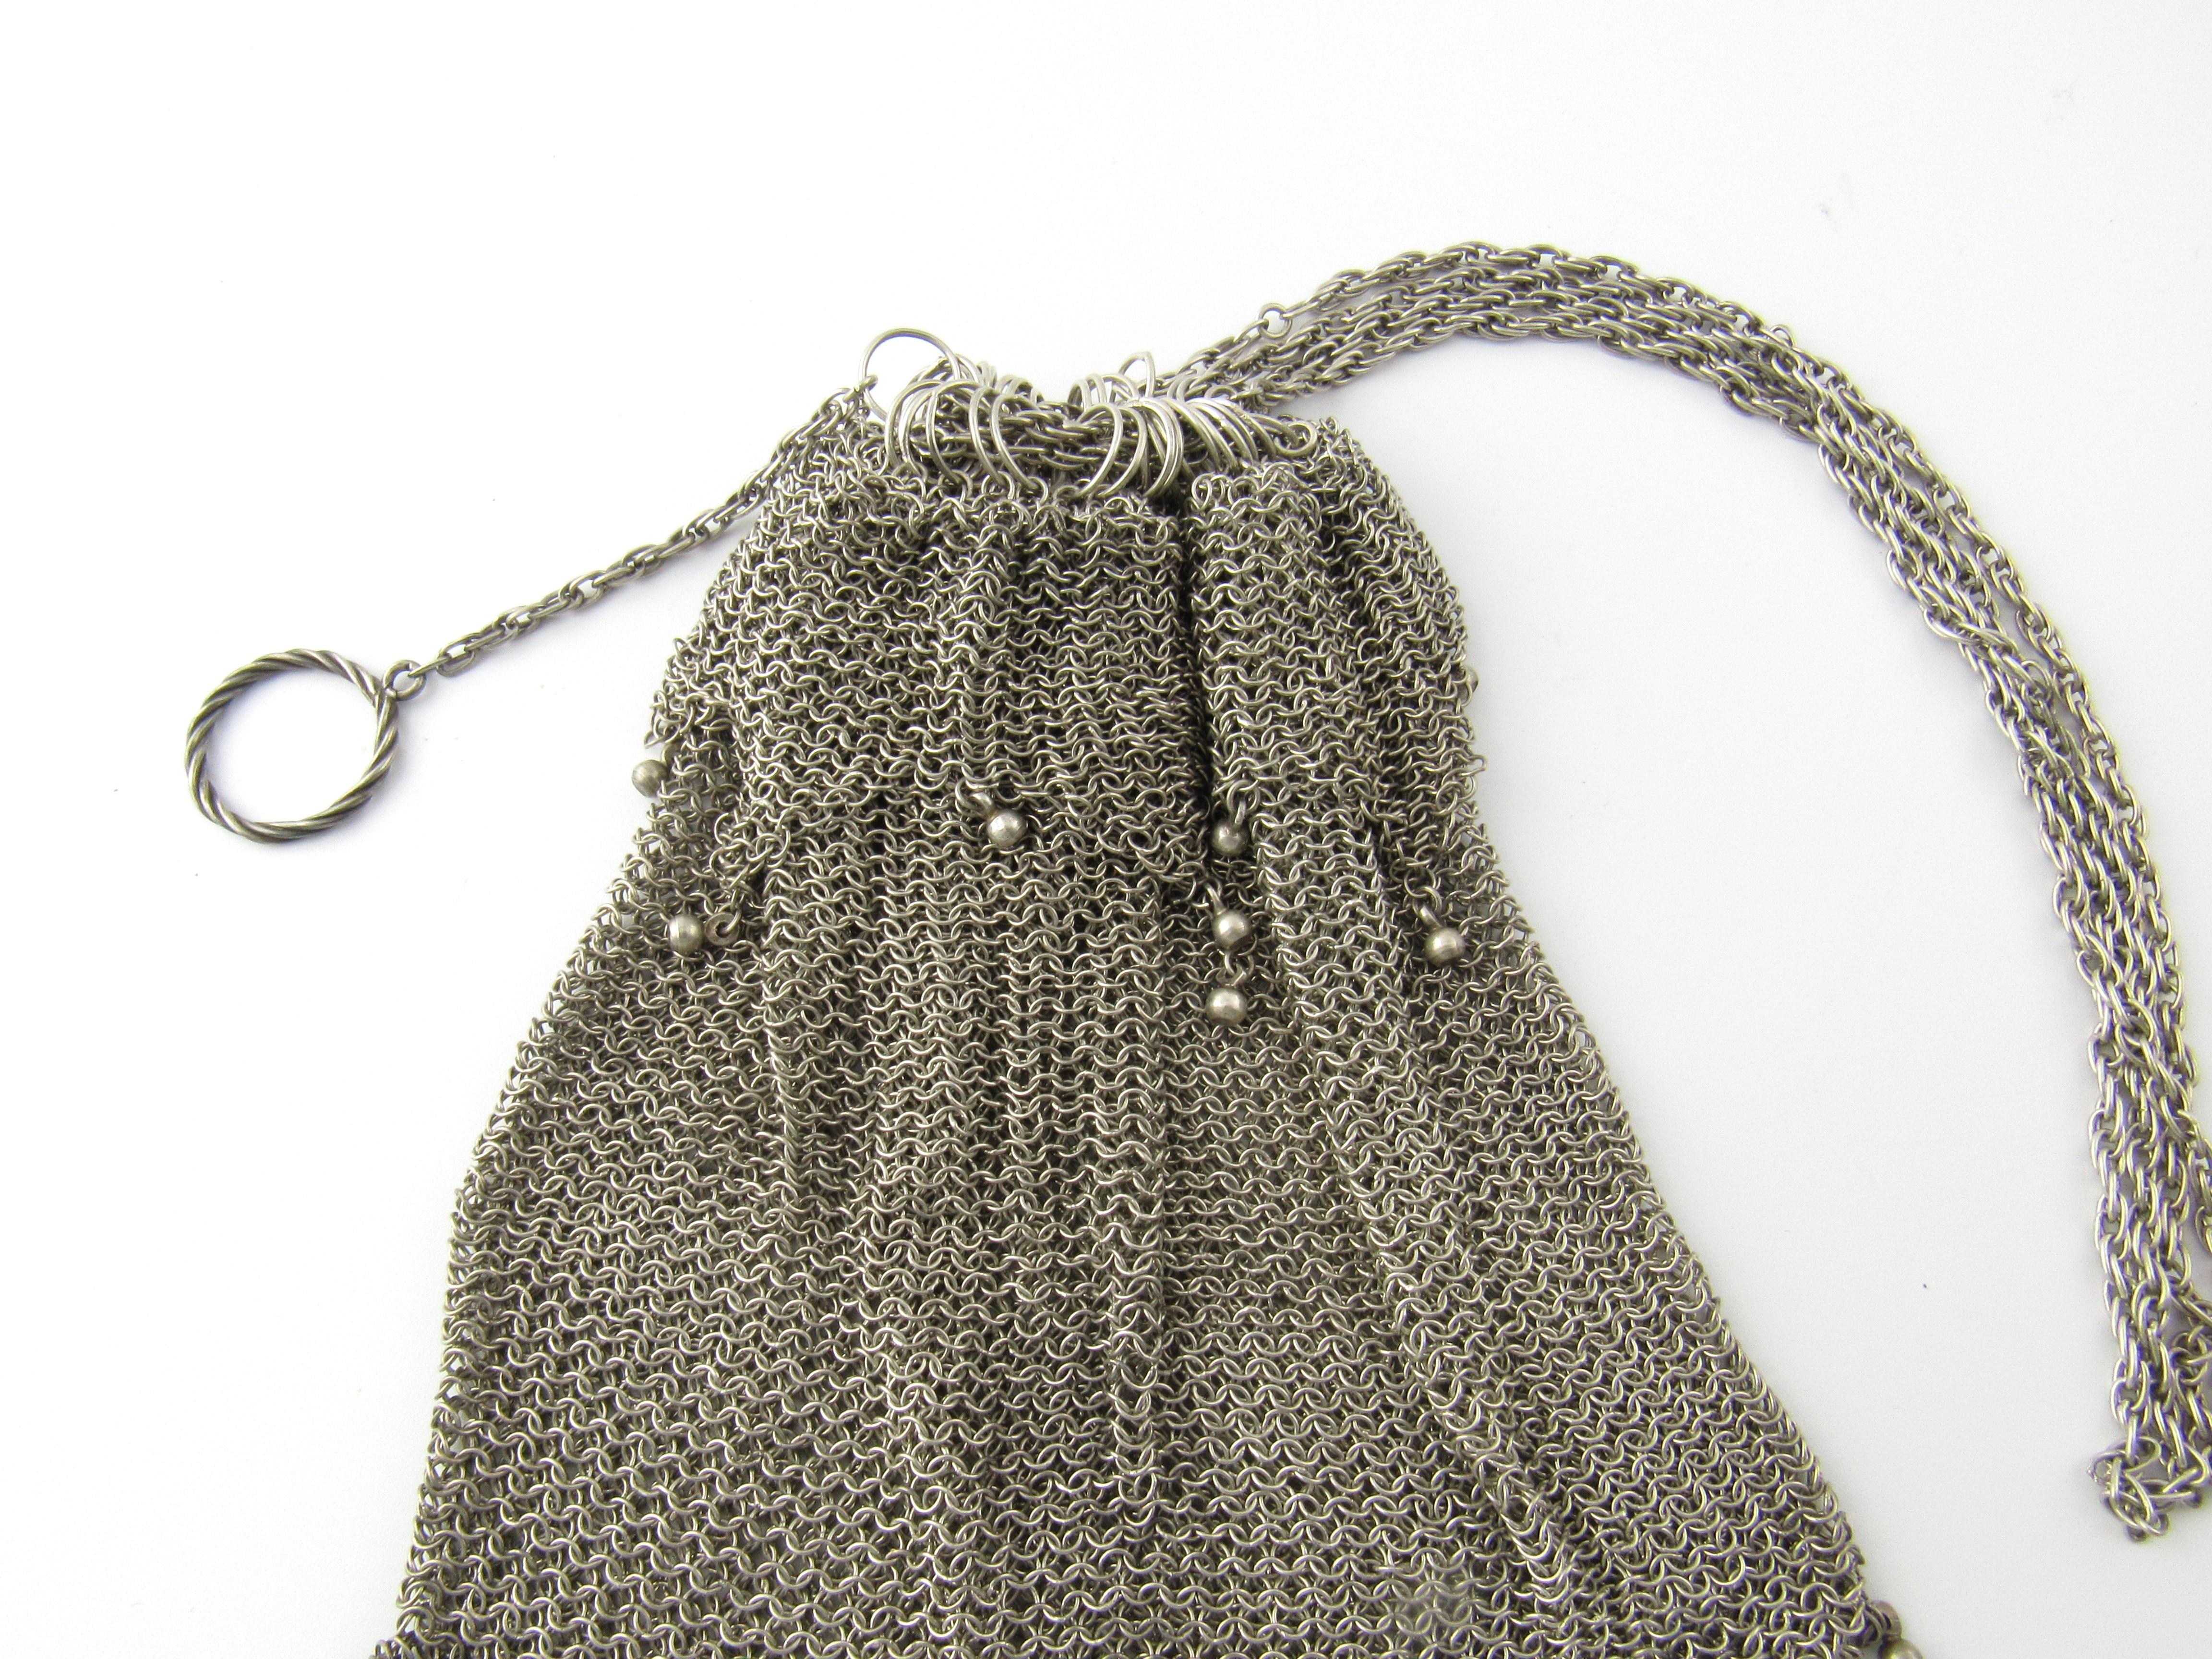 Vintage Sterling Silver Beaded Mesh Purse Pull Closure

This is a beautiful sterling silver beaded mesh purse with pull closure. The purse is embellished with silver dangling beads from the puse. You will simply be delighted with the condition,